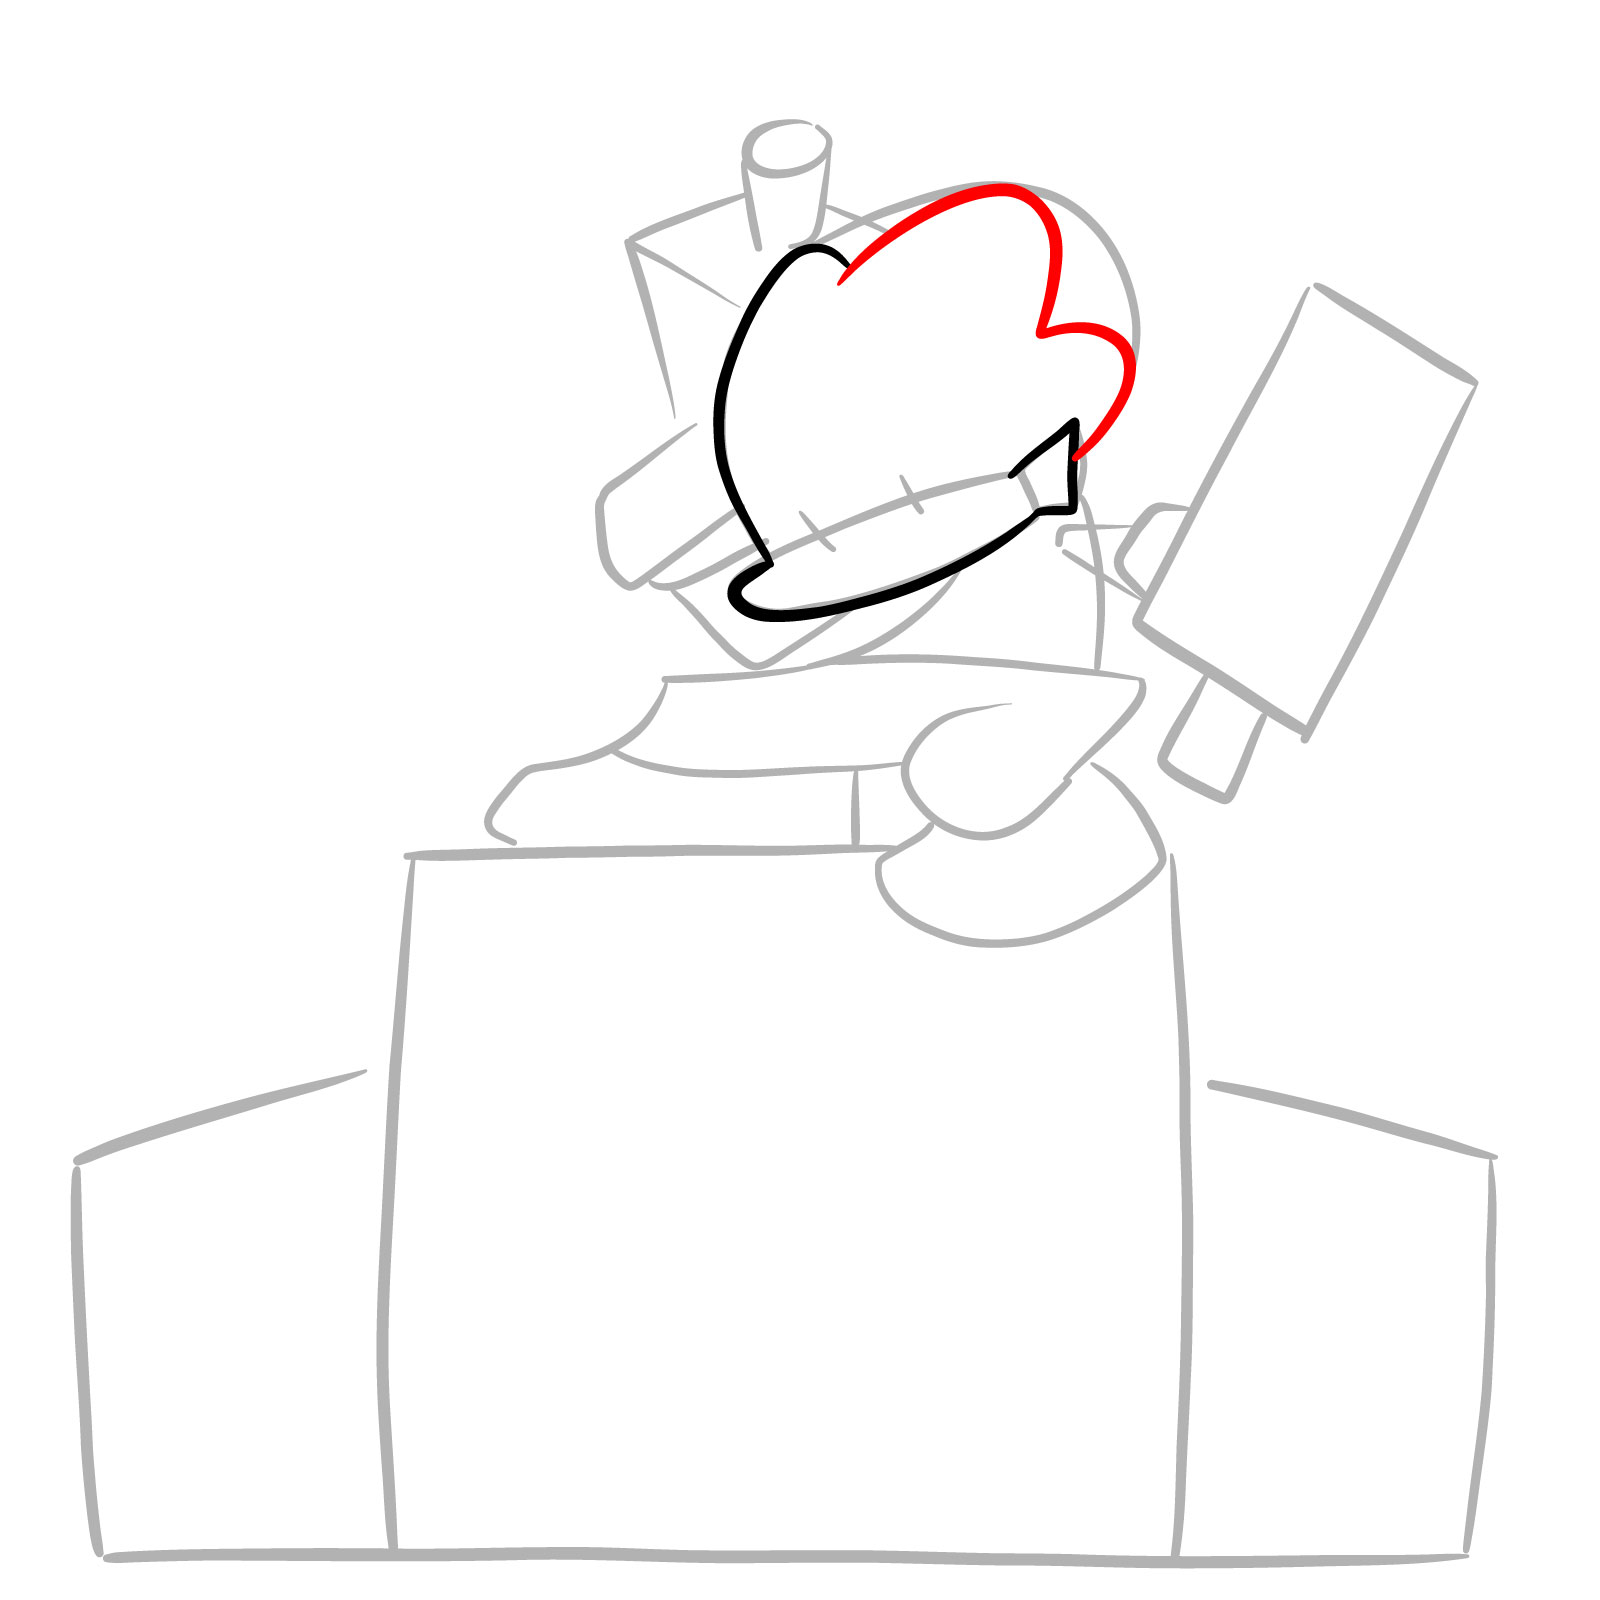 How to draw Pico on the speakers - step 06